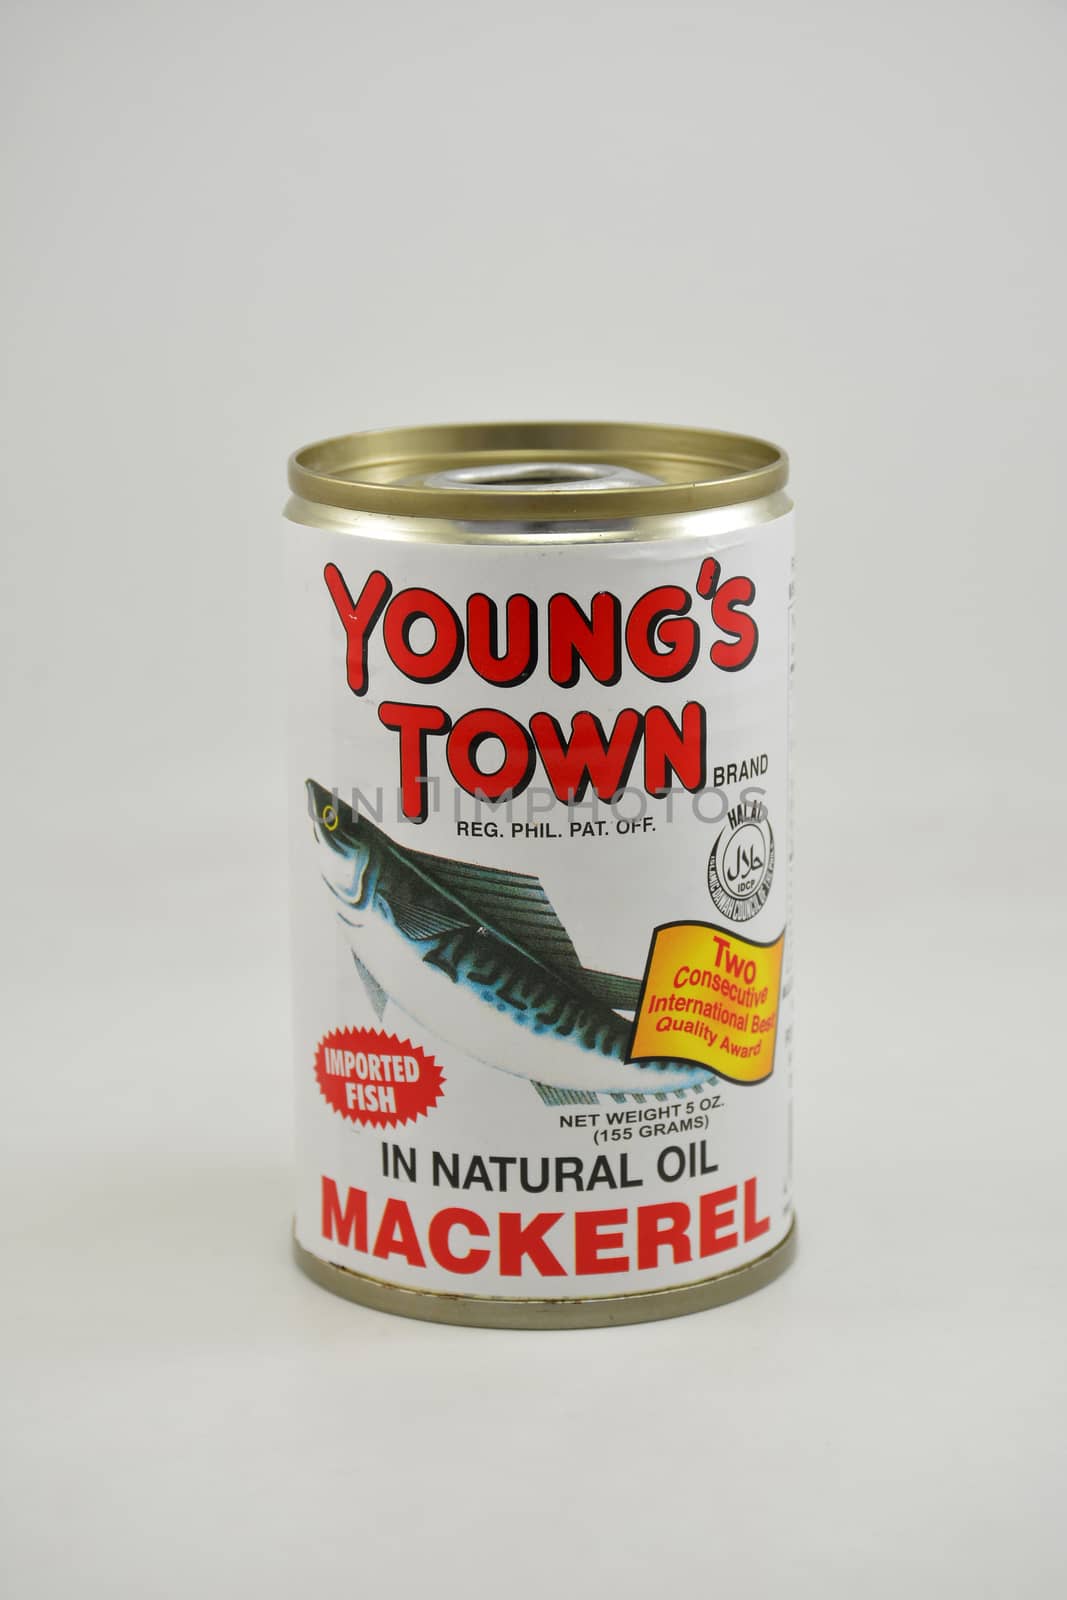 MANILA, PH - JUNE 26 - Youngs town mackerel fish can on June 26, 2020 in Manila, Philippines.